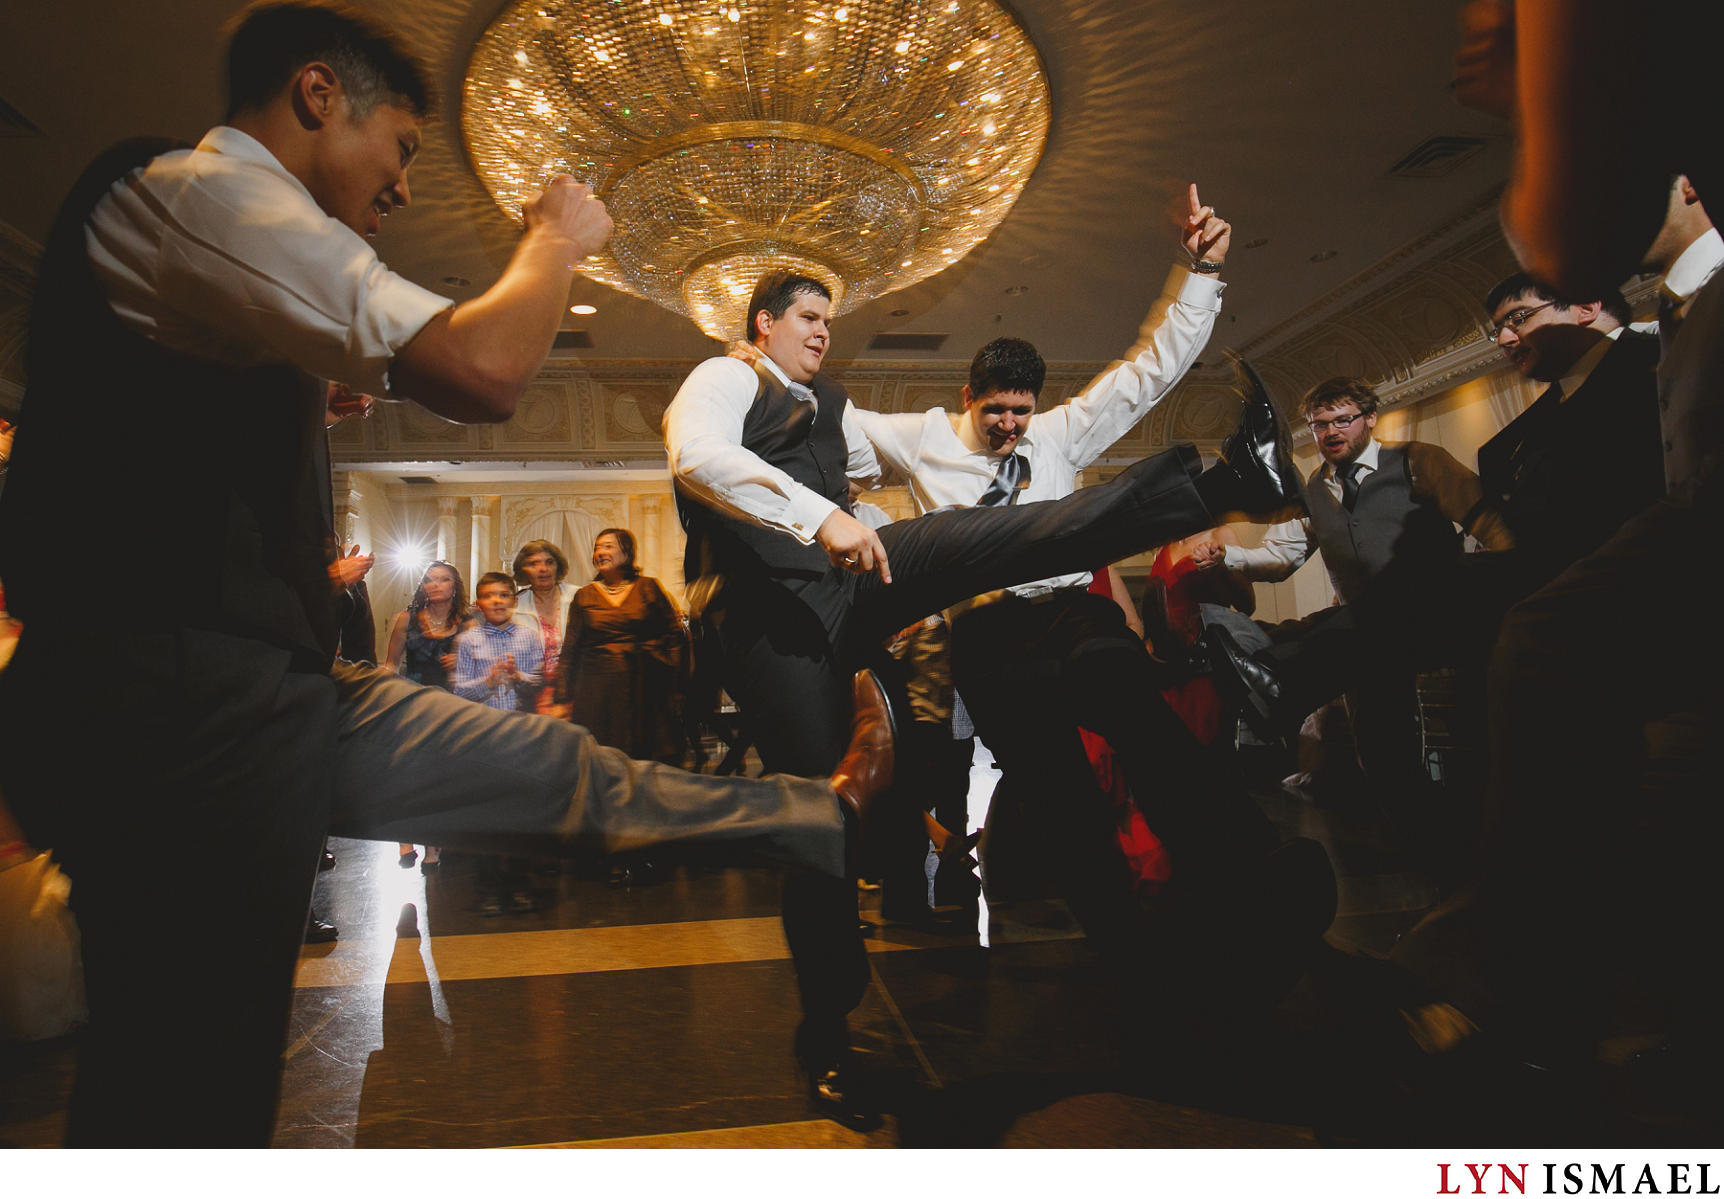 Groom and his brother dancing to Rasputin at a wedding reception in paradise Banquet Hall in Vaughan, Ontario.